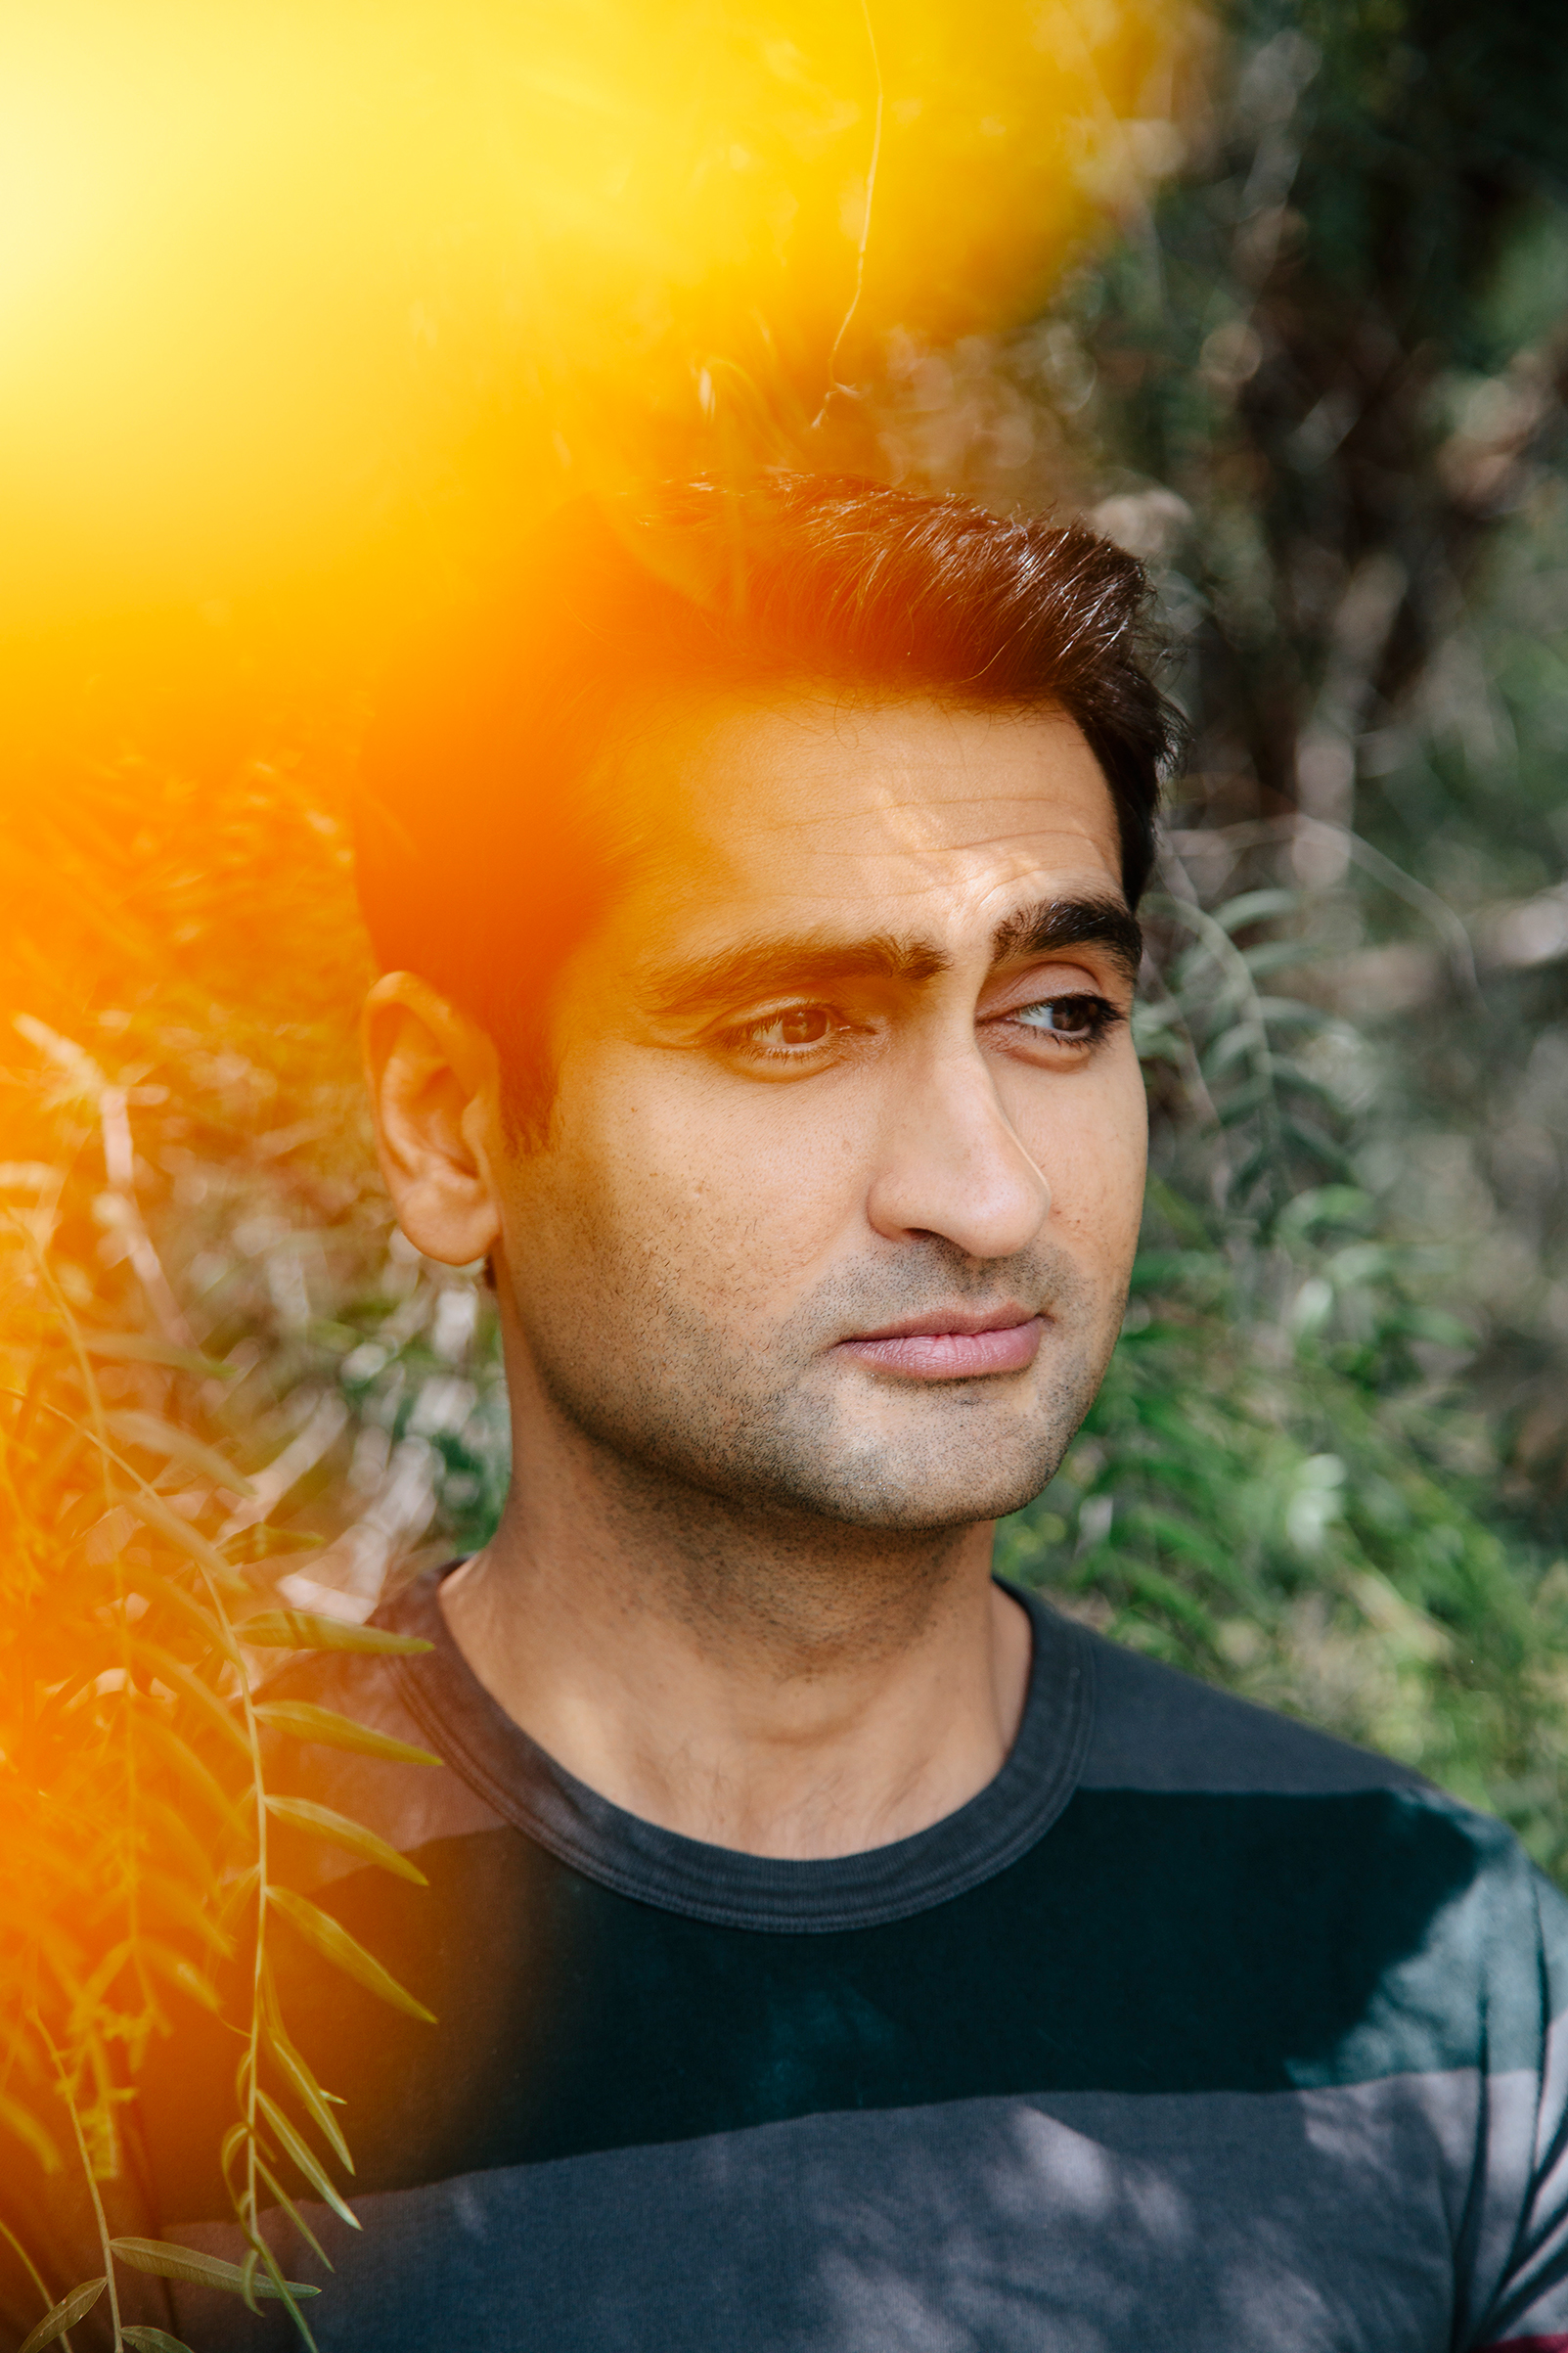 Kumail Nanjiani photographed in Griffith Park in Los Angeles, April 17, 2017. (Brinson+Banks—The New York Times/Redux)